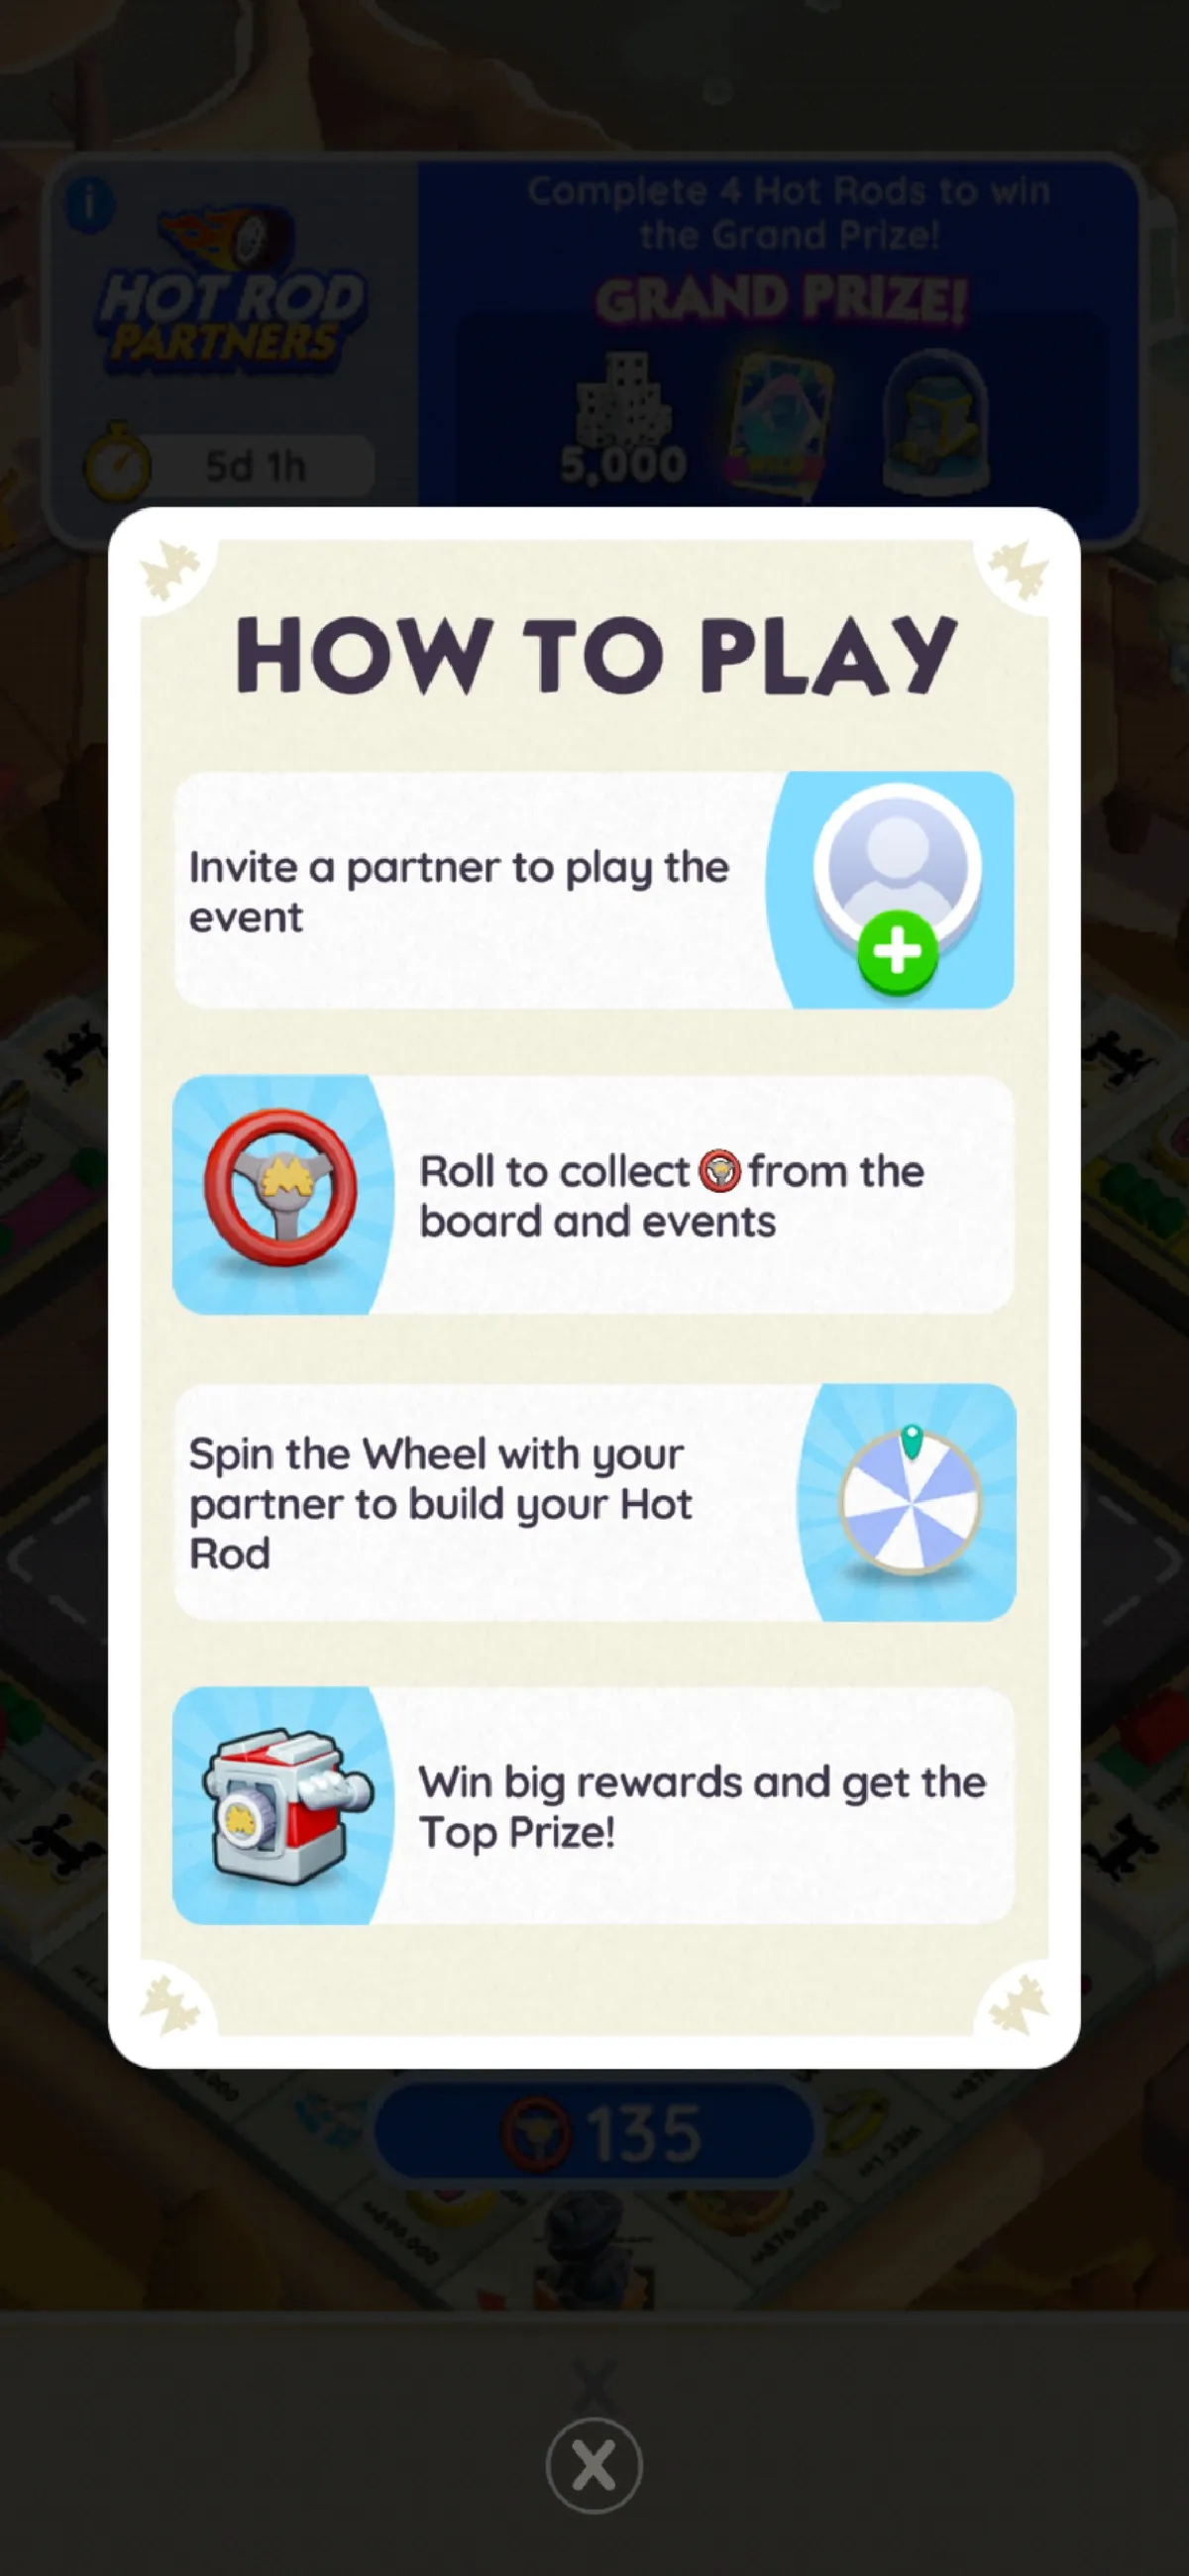 An image showing the directions for the Hot Rod Partners event in Monopoly GO as part of a list of all the rewards and milestones available as part of it.